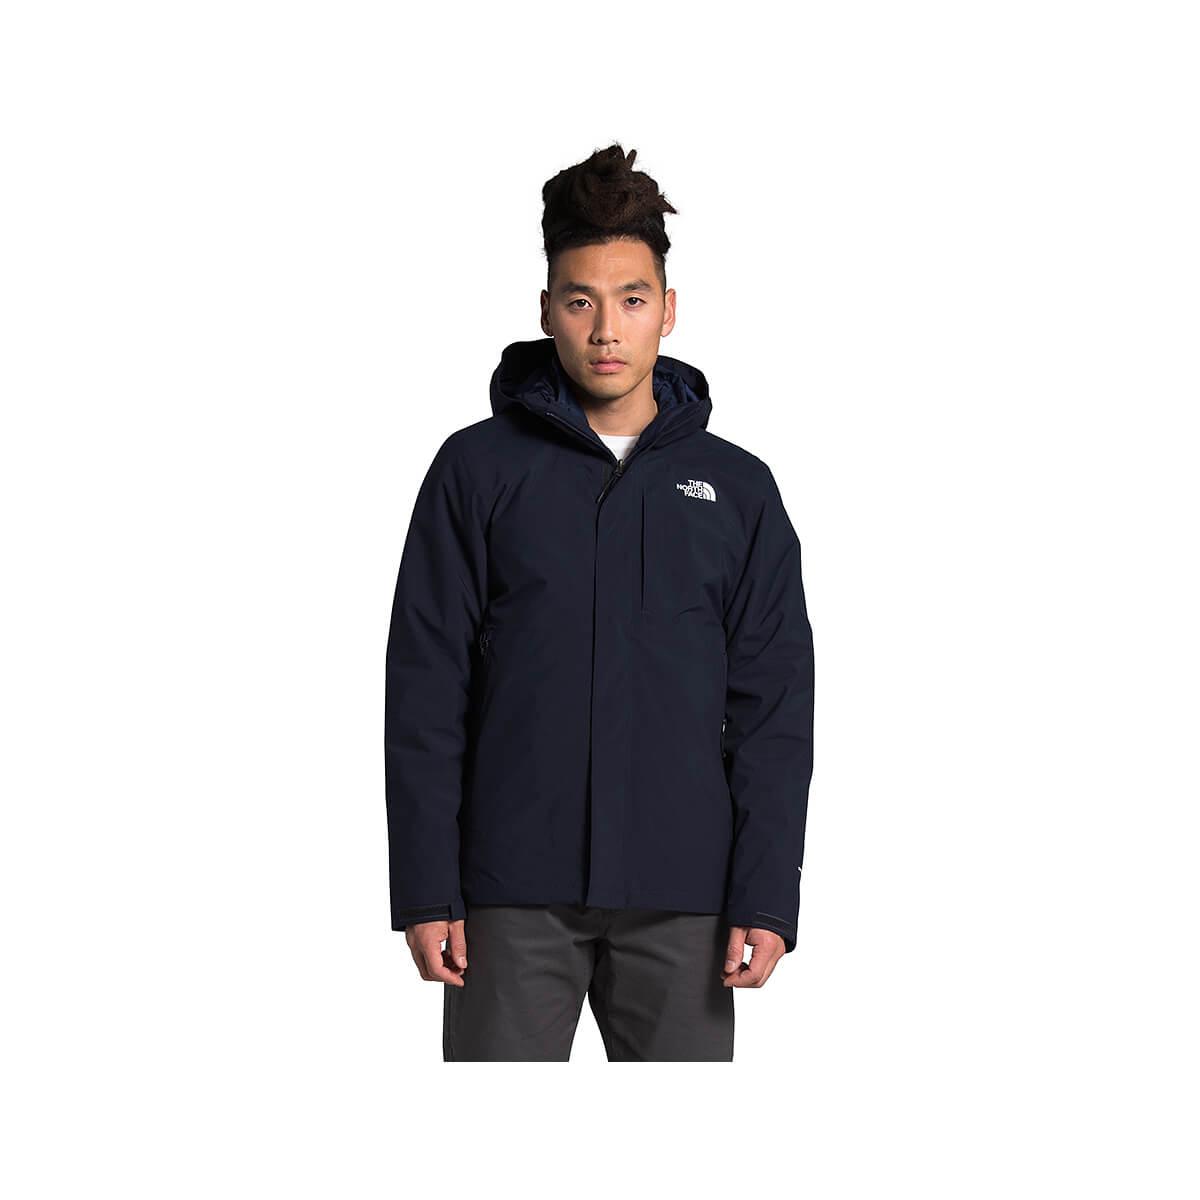 the north face triclimate jacket men's